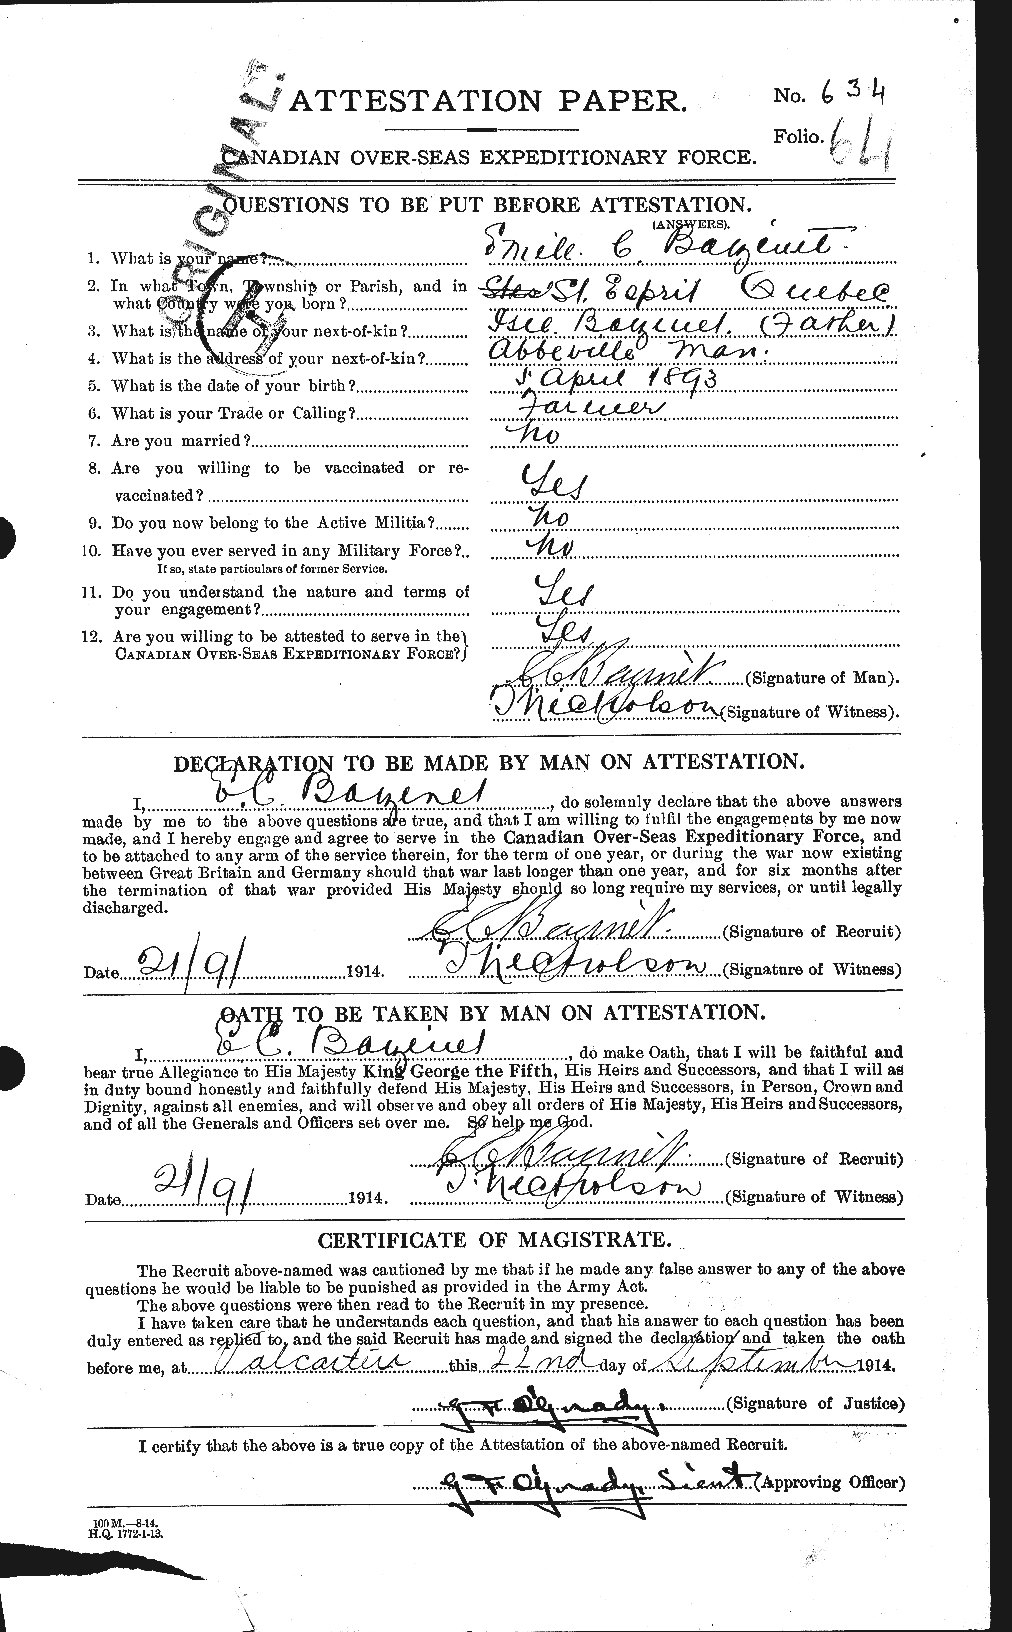 Personnel Records of the First World War - CEF 229859a